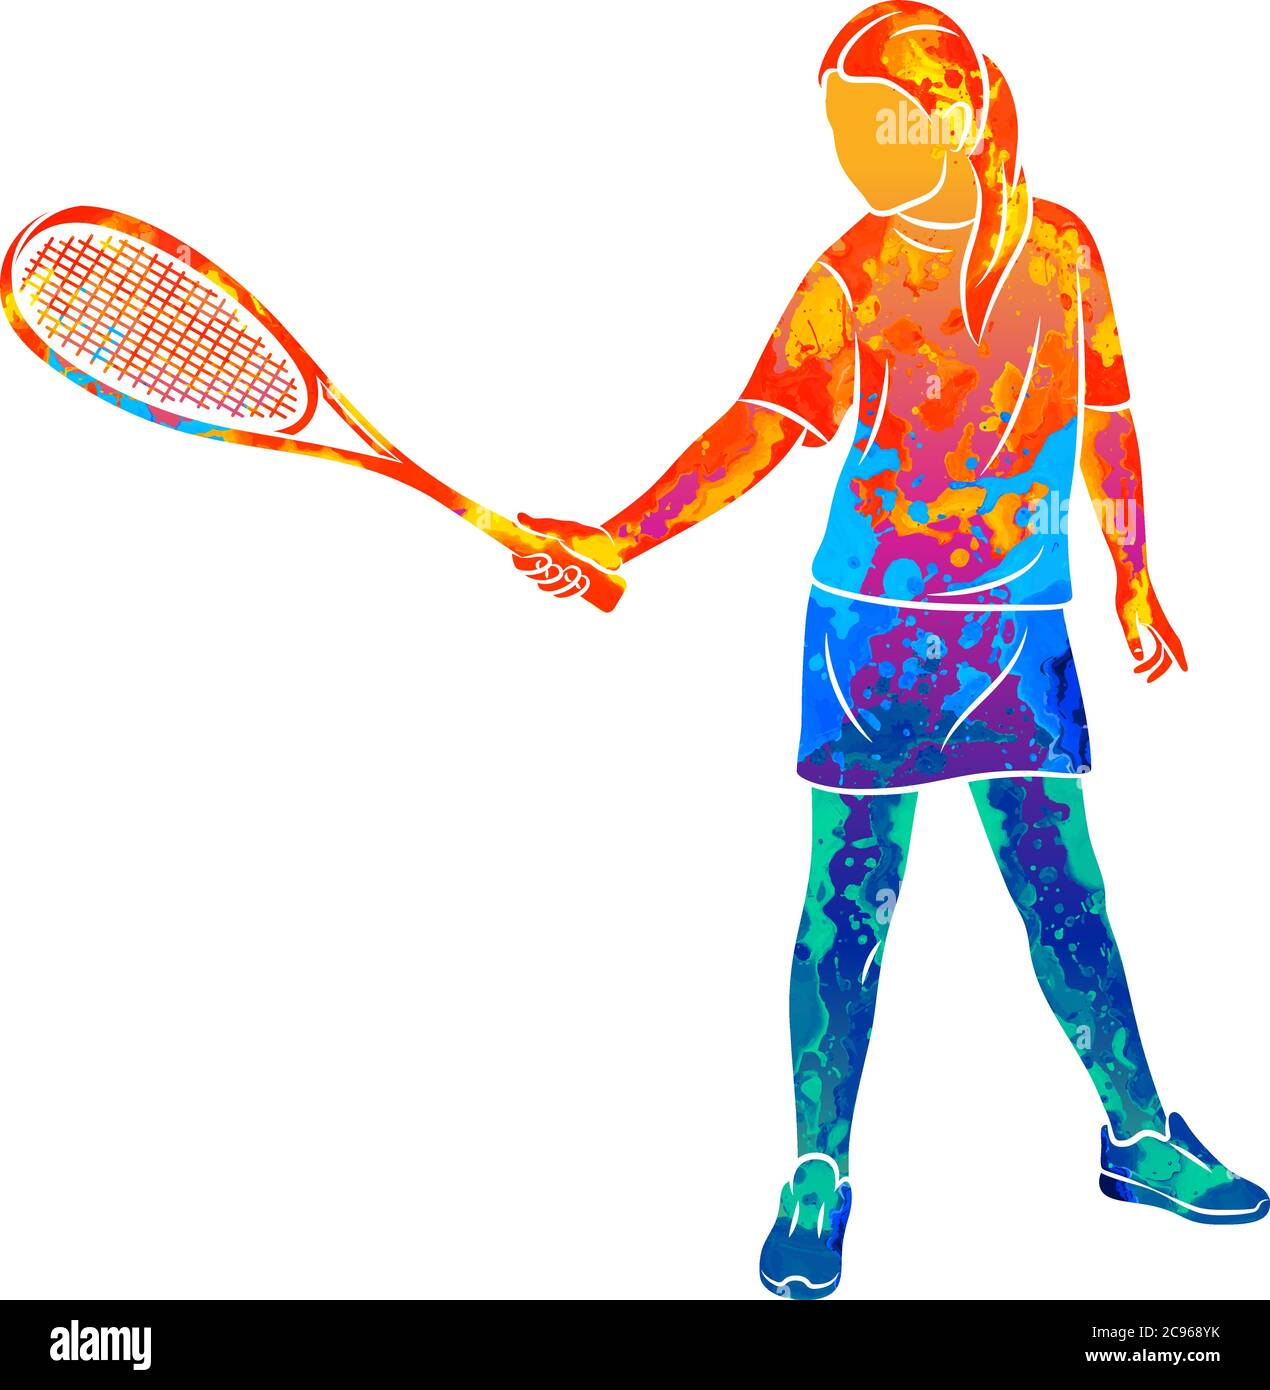 Abstract young woman does an exercise with a racket on her right hand in squash. Squash game training Stock Vector